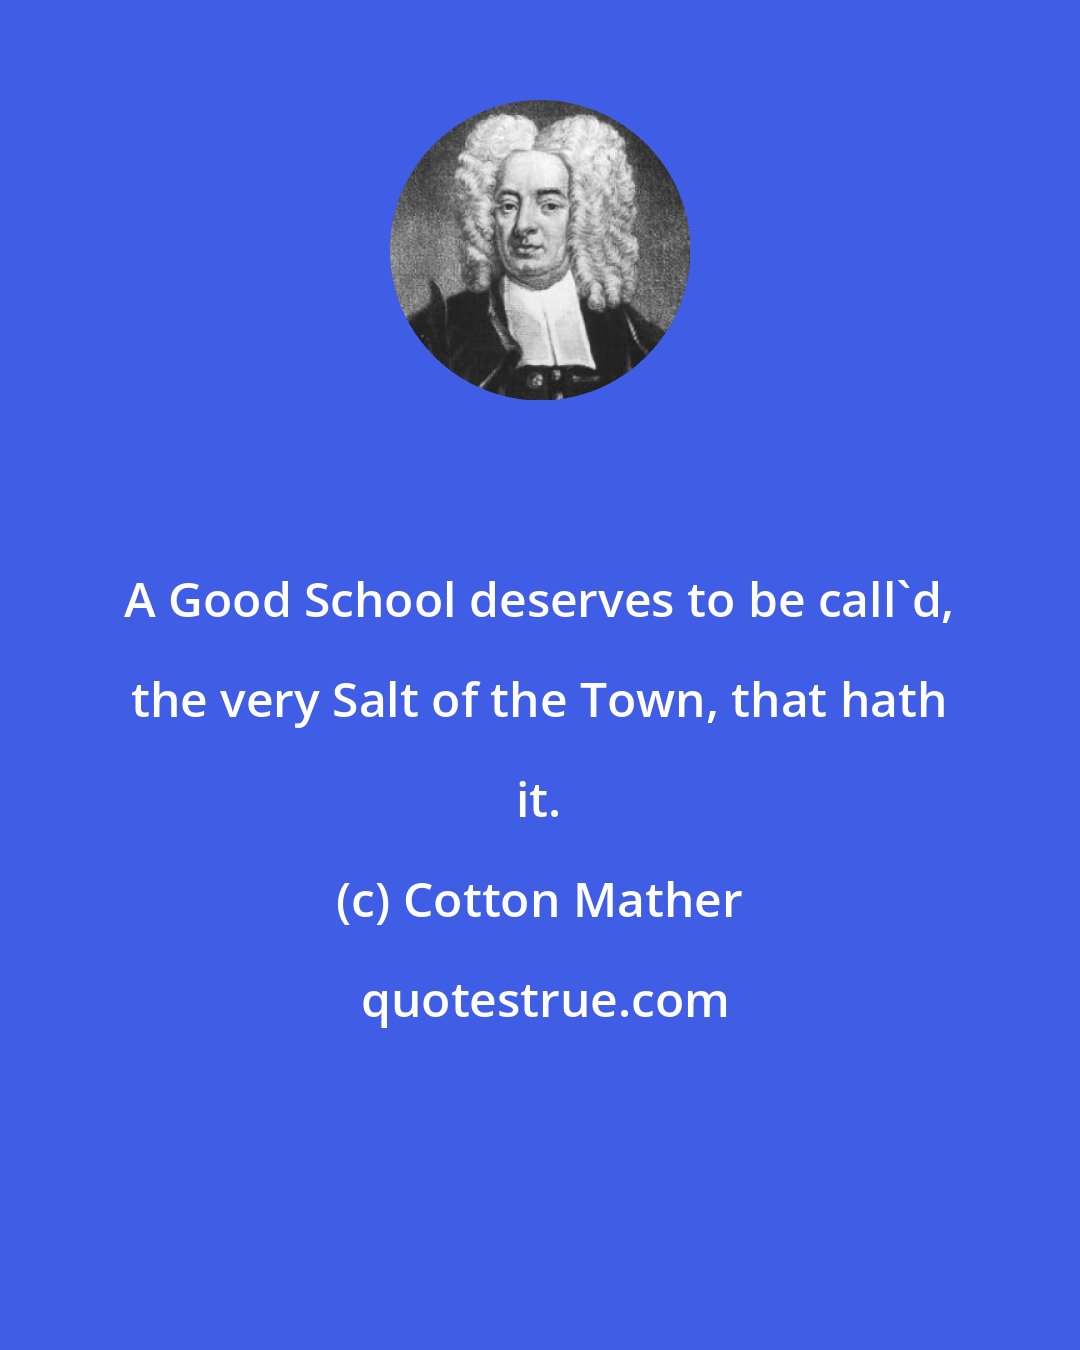 Cotton Mather: A Good School deserves to be call'd, the very Salt of the Town, that hath it.